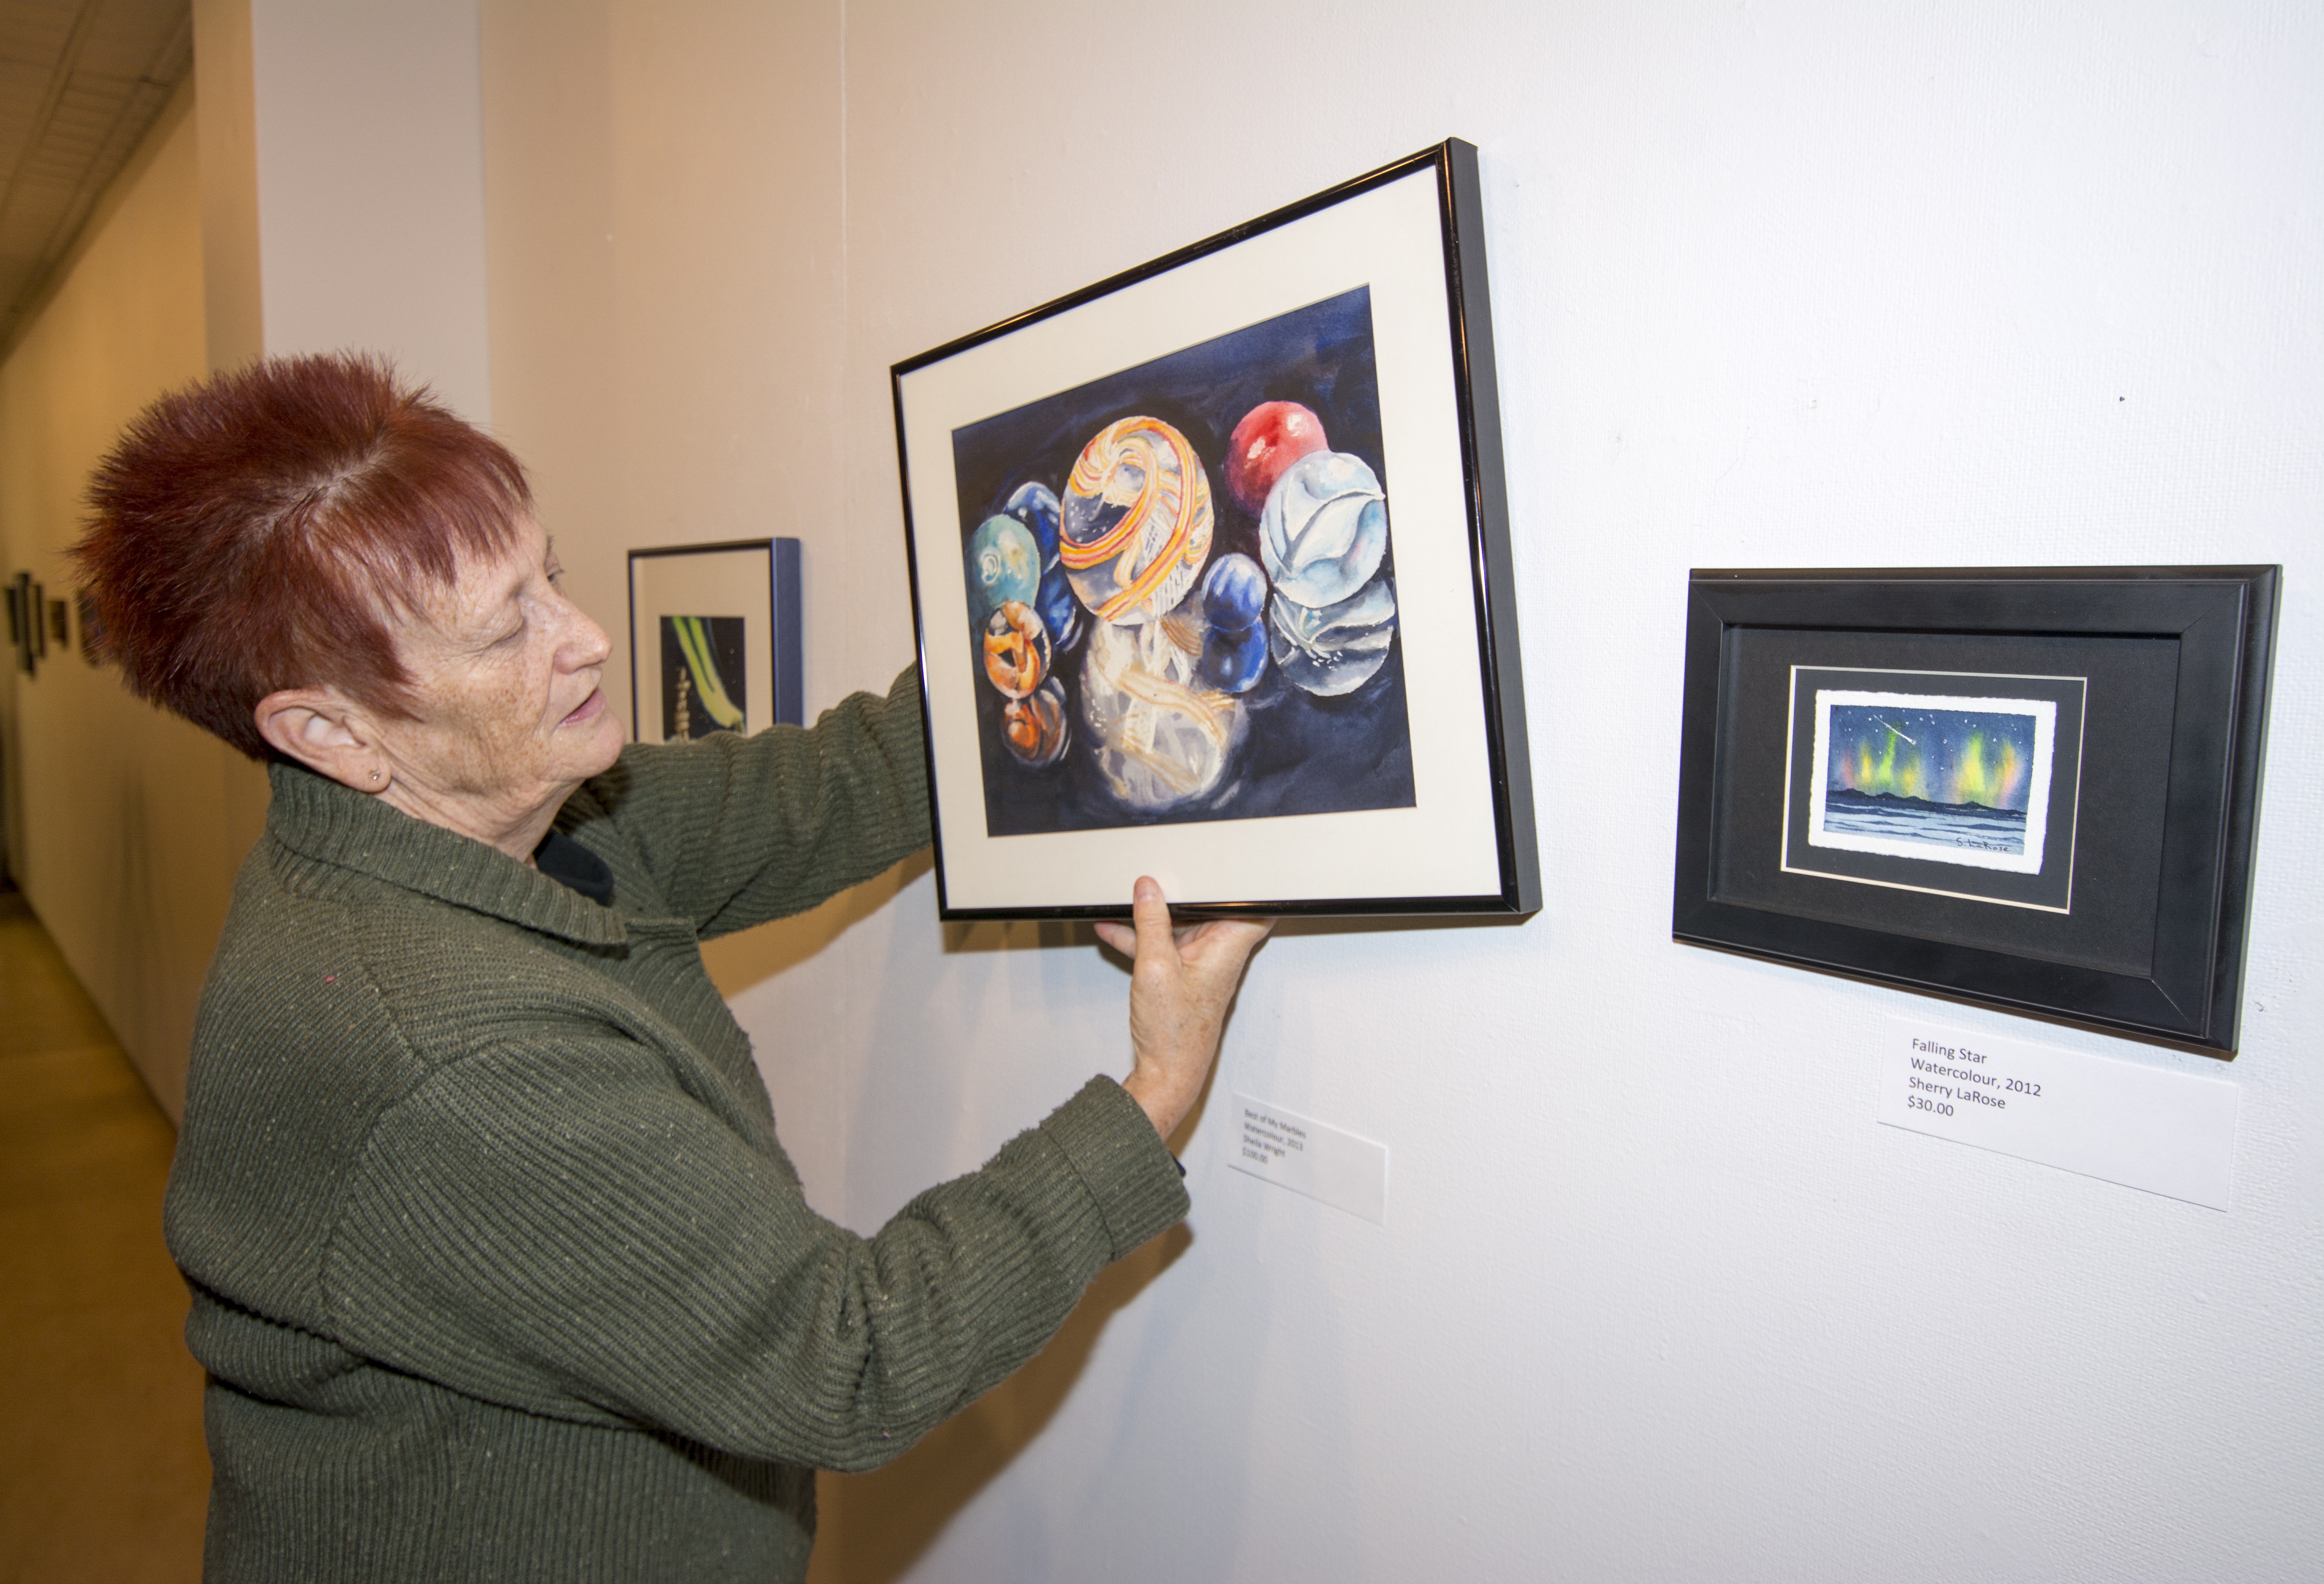 PREPARING – Diana Anderson of the Red Deer Arts Council puts the finishing touches on a new exhibit featuring Council members’ works of art in the Kiwanis Gallery.